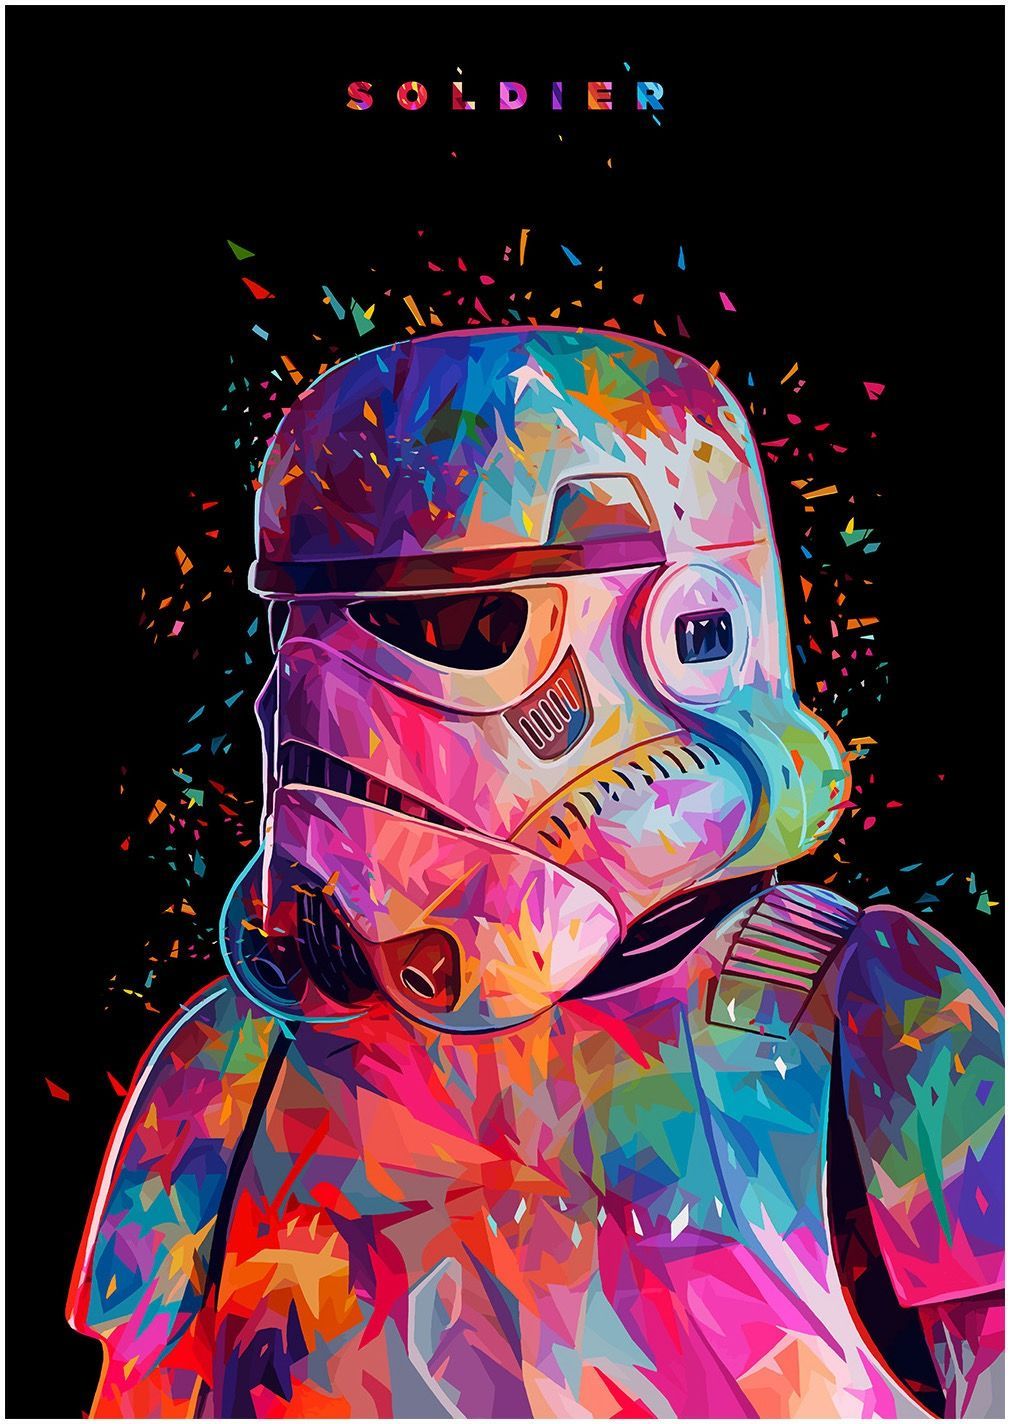 On a white or gold background. Star wars art, Star wars tribute, Star wars wallpaper